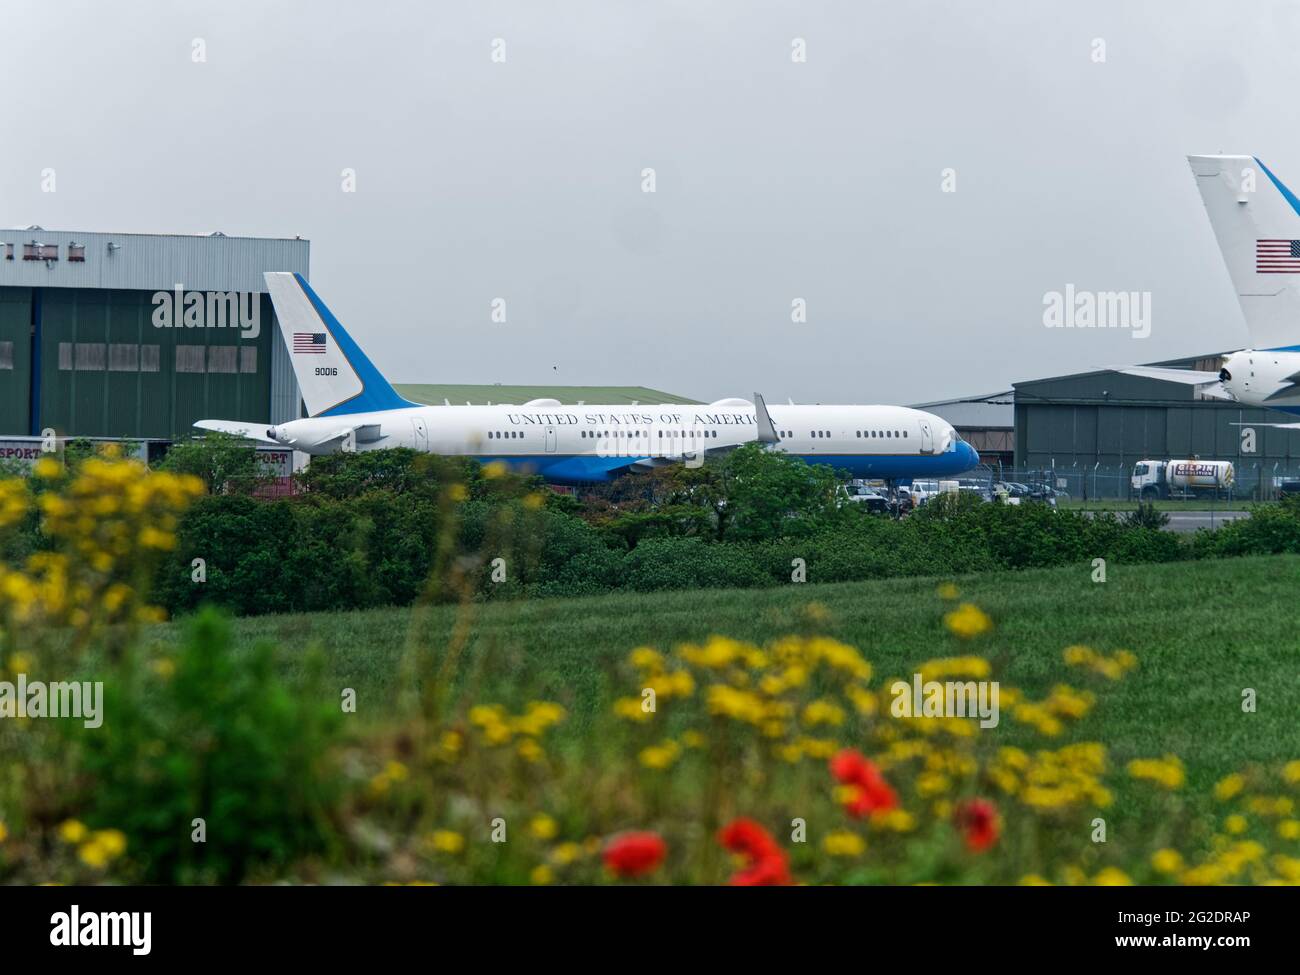 Newquay Cornwall Airport. G7, Airforce One and support aircraft at Cornwall airport. Pfizer corp CEO Albert Bourla`s company aircraft parks next to Boris Johnson`s aircraft.  Essex police seconded to Cornwall check plane spotters. 10th June 2021. Credit: Robert Taylor/Alamy Live News Stock Photo